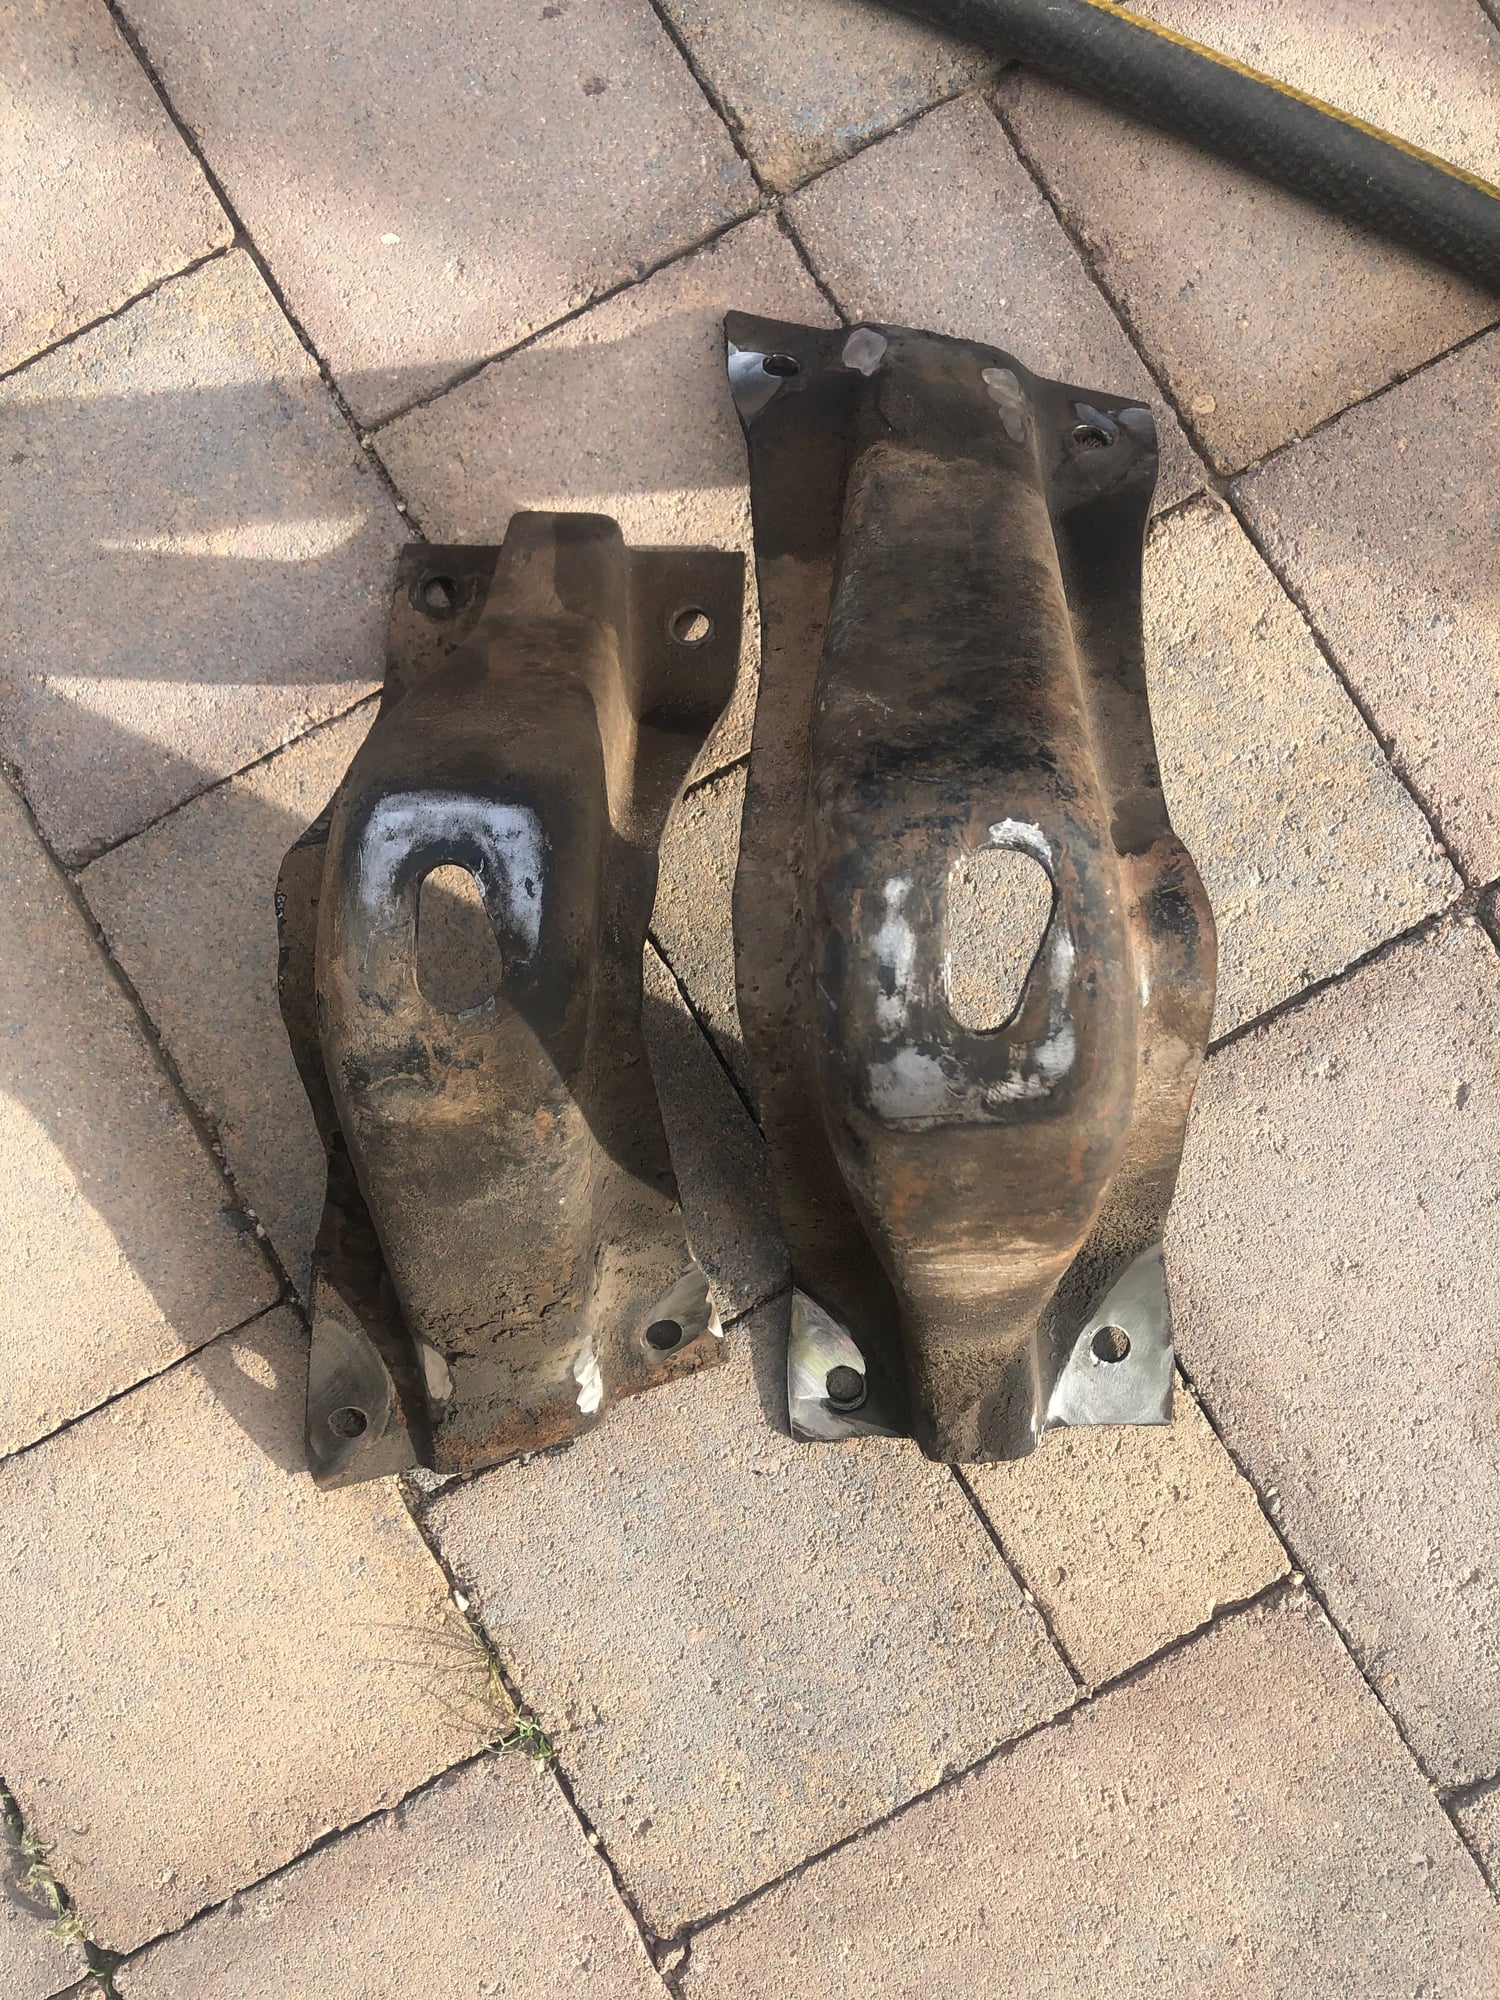 Miscellaneous - 66 f100 240 inline 6 motor mounts - Used - 1966 Ford 1/2 Ton Pickup - Laveen, AZ 85339, United States